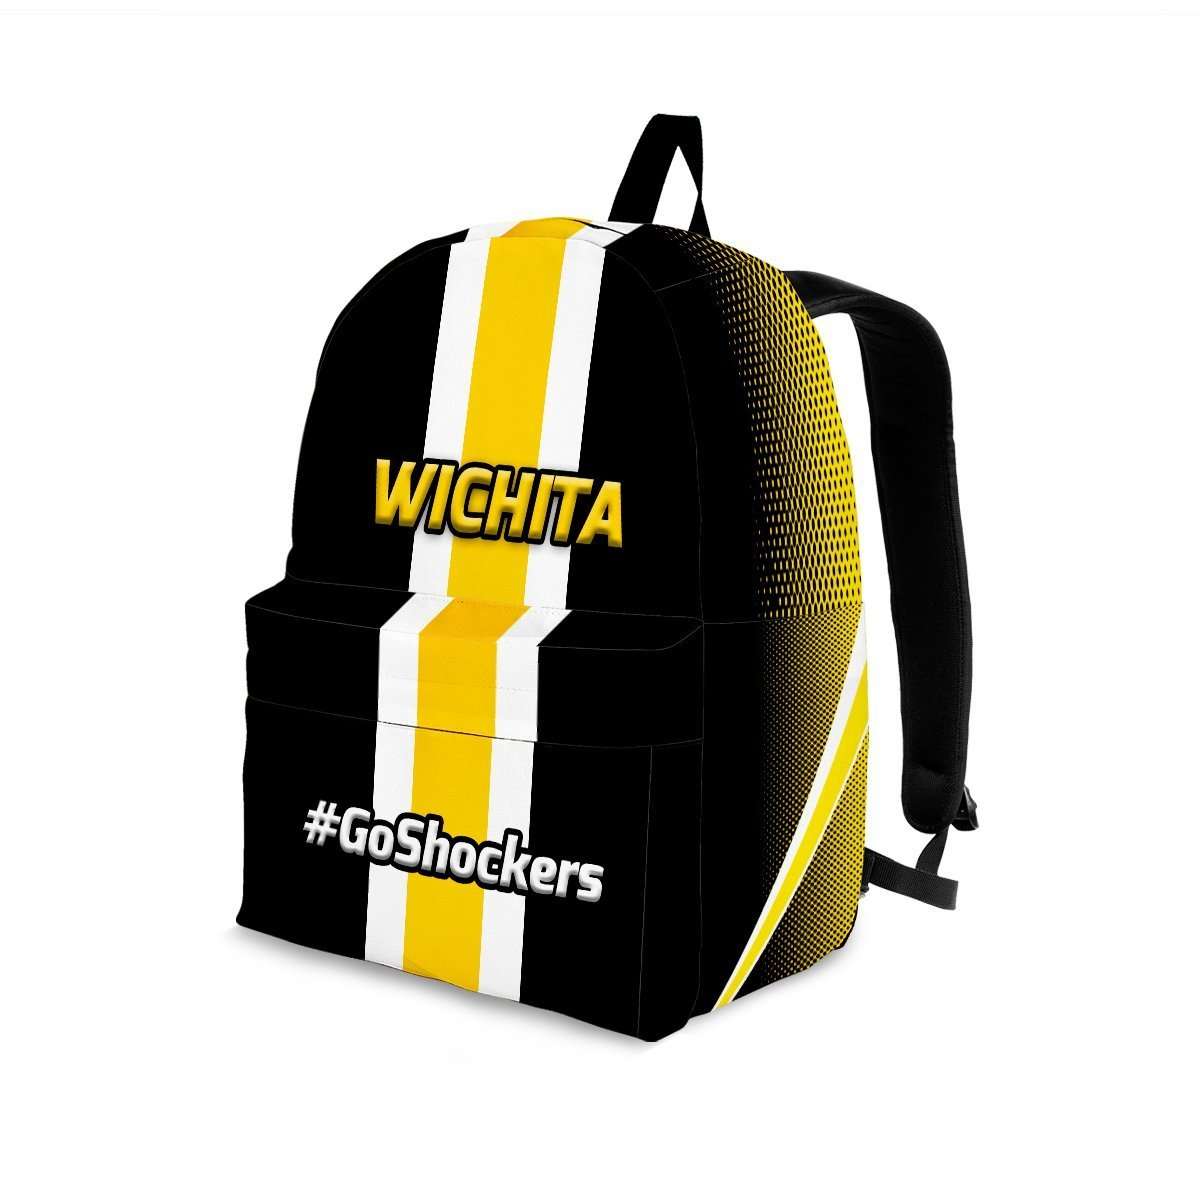 Designs by MyUtopia Shout Out:#GoShockers Wichita Backpack,Large (18 x 14 x 8 inches) / Adult (Ages 13+),Backpacks